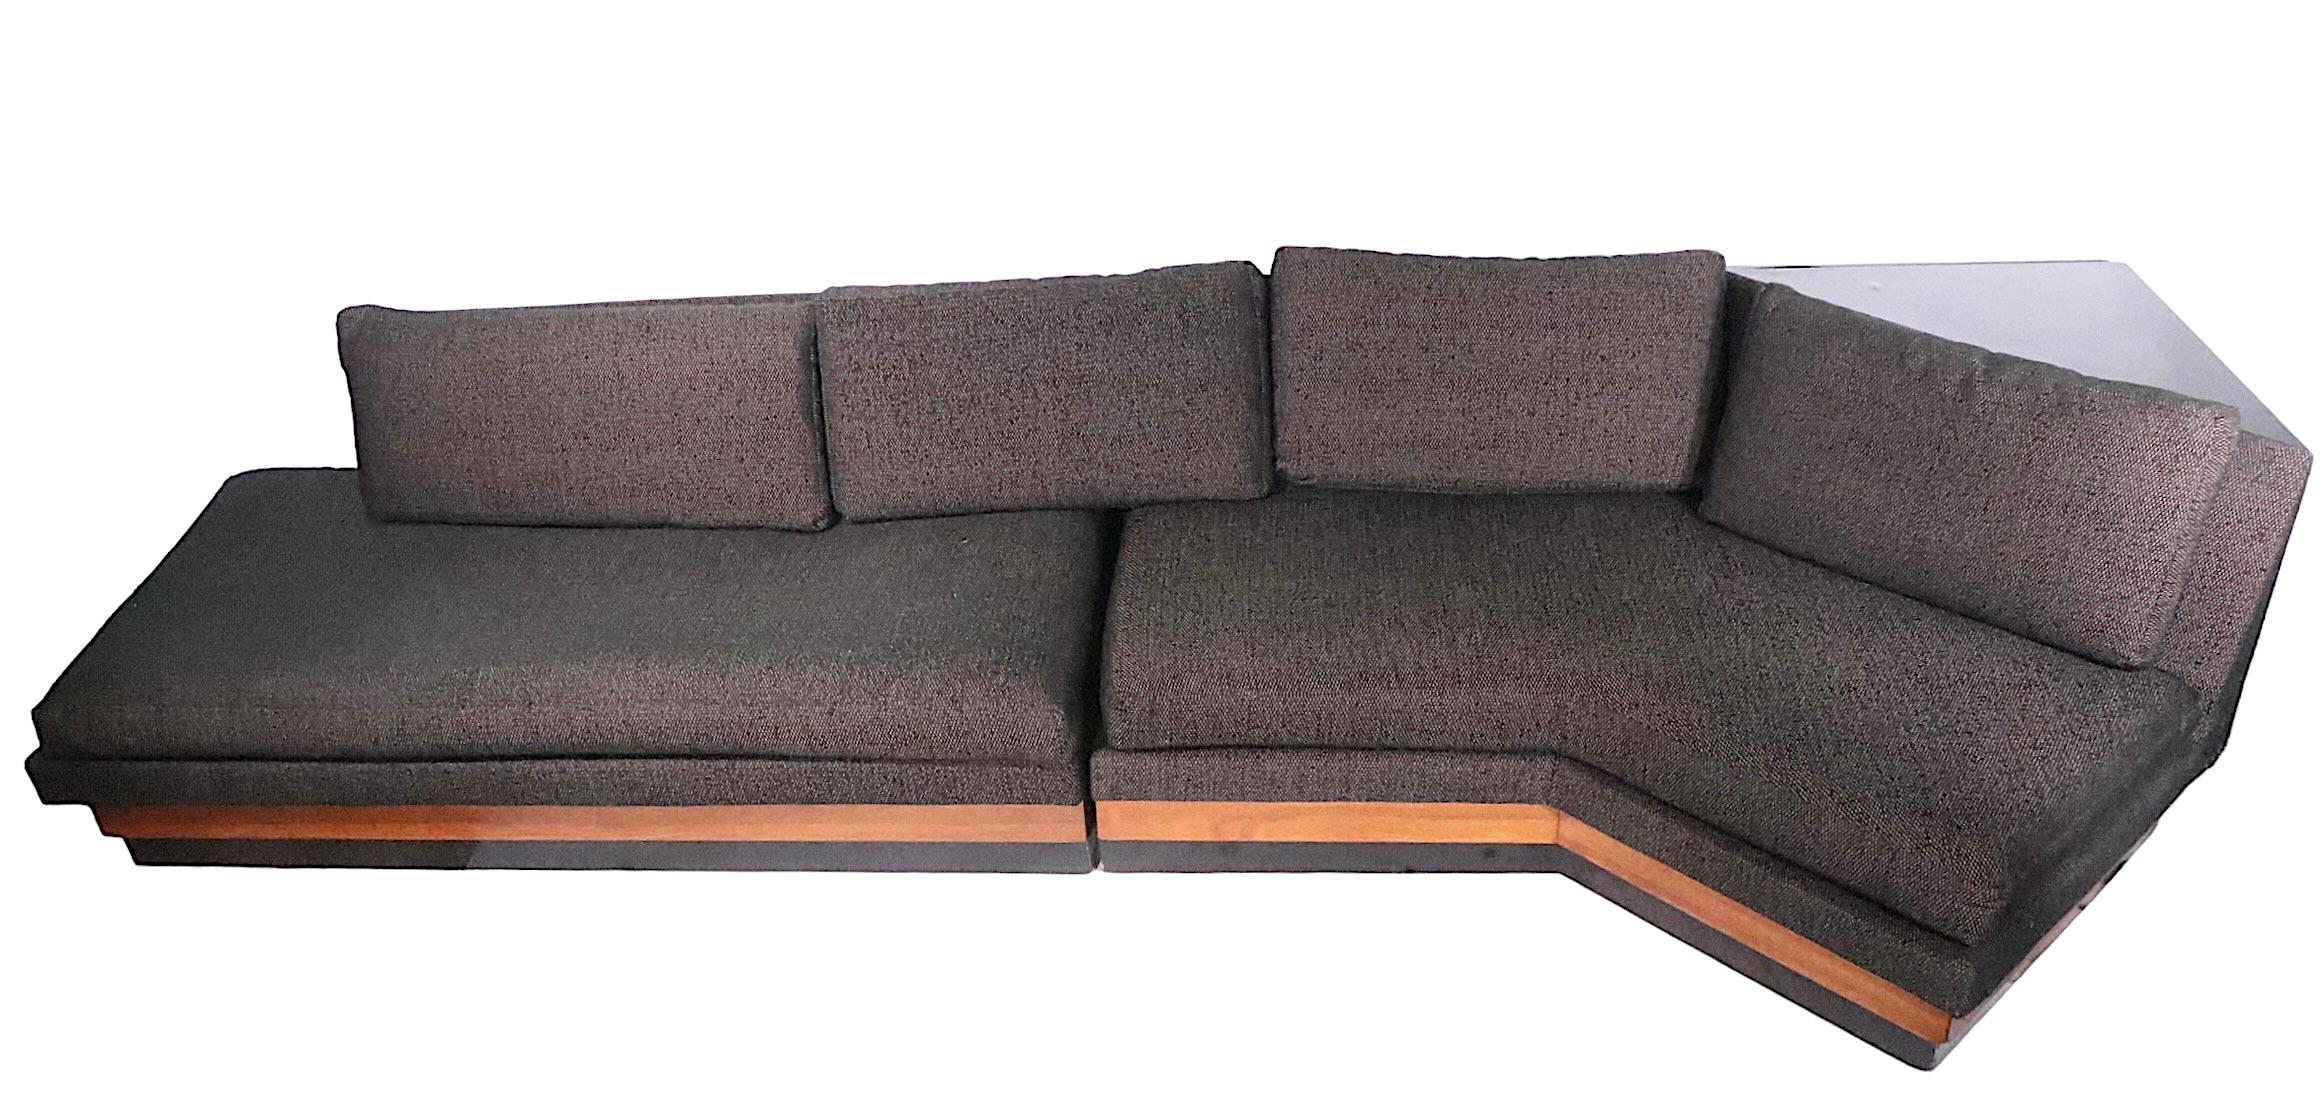 Mid Century Sectional Sofa by Adrian Pearsall for Craft Associates c 1960's For Sale 2